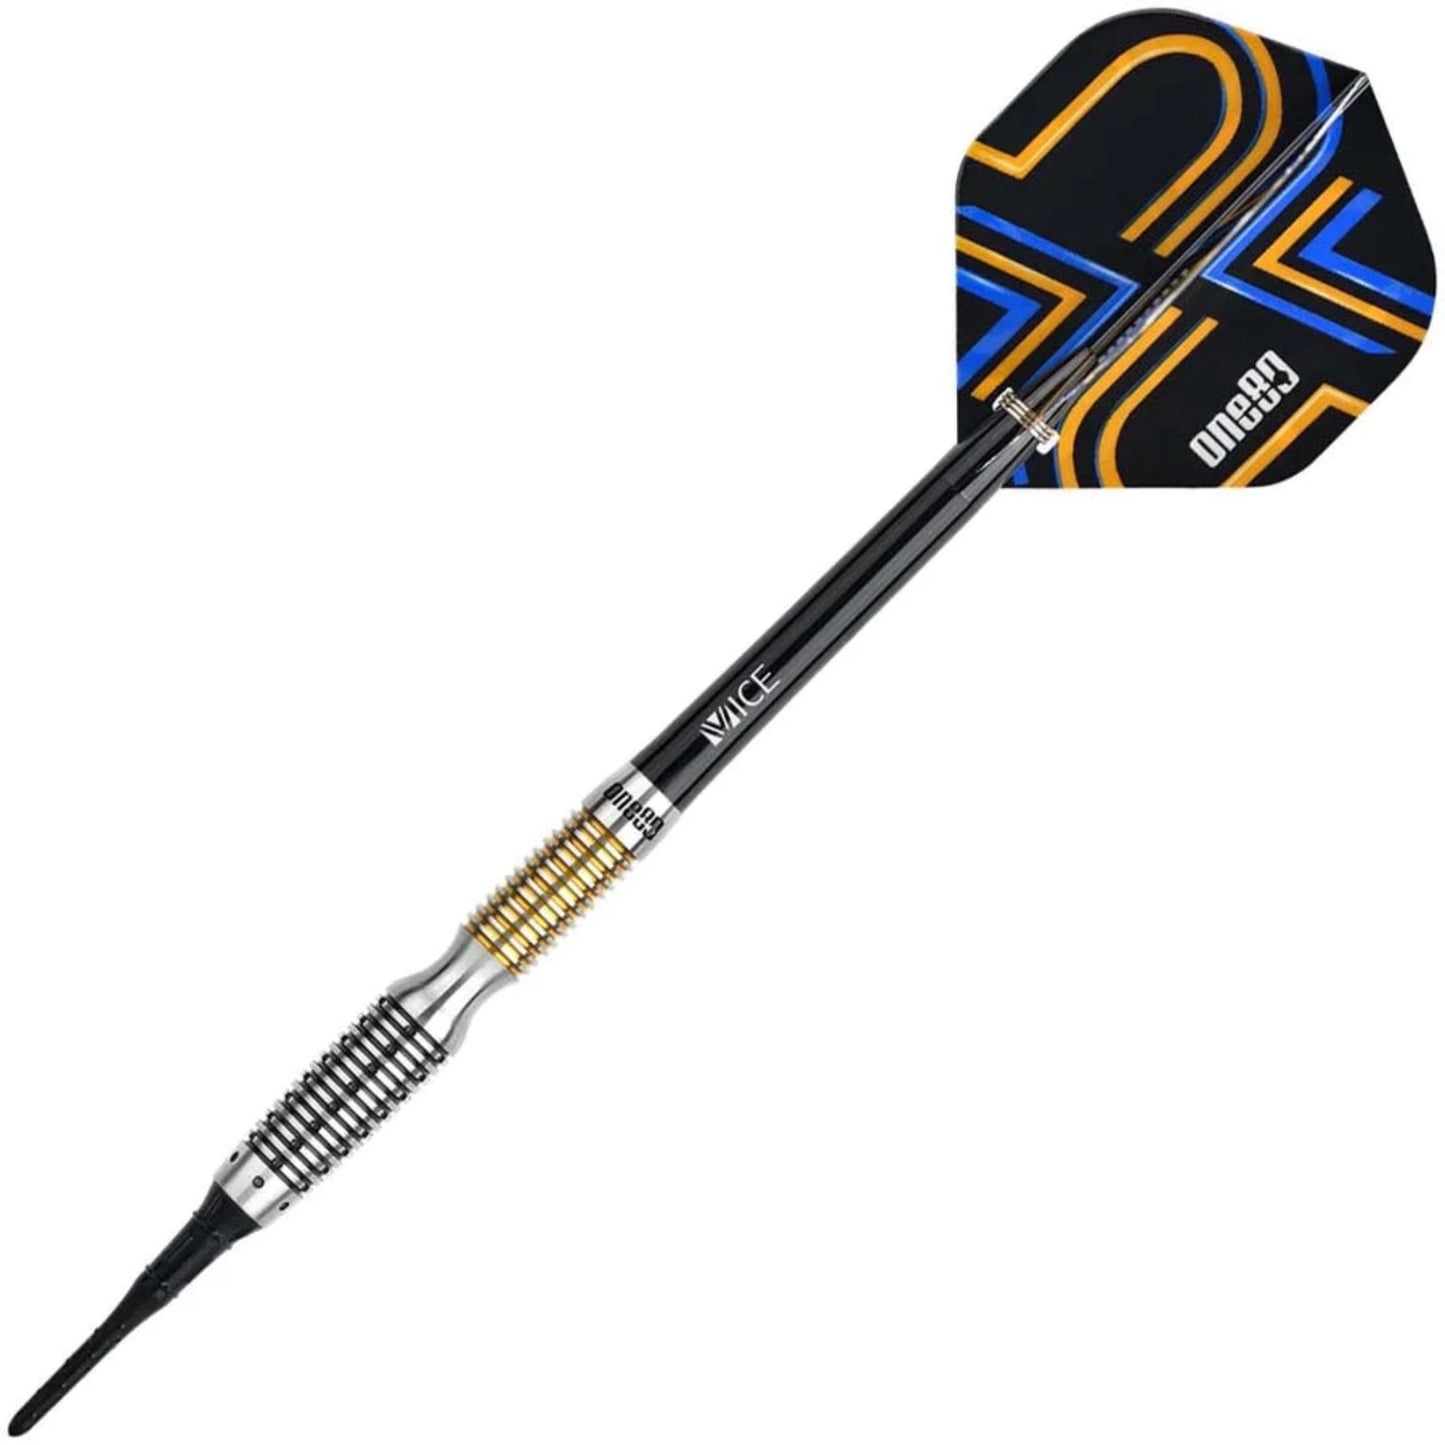 A single dart from the One80 Ascent Soft Tip Dart Set. The barrel is primarily silver, with a concave grip featuring black grooves. Higher up on the barrel is another set of grooves that are gold-colored. The shaft is black, and the flight is black featuring gold and blue linework in an organic shape. "one80" is displayed on the flight in white text, and in black on the top of the barrel.